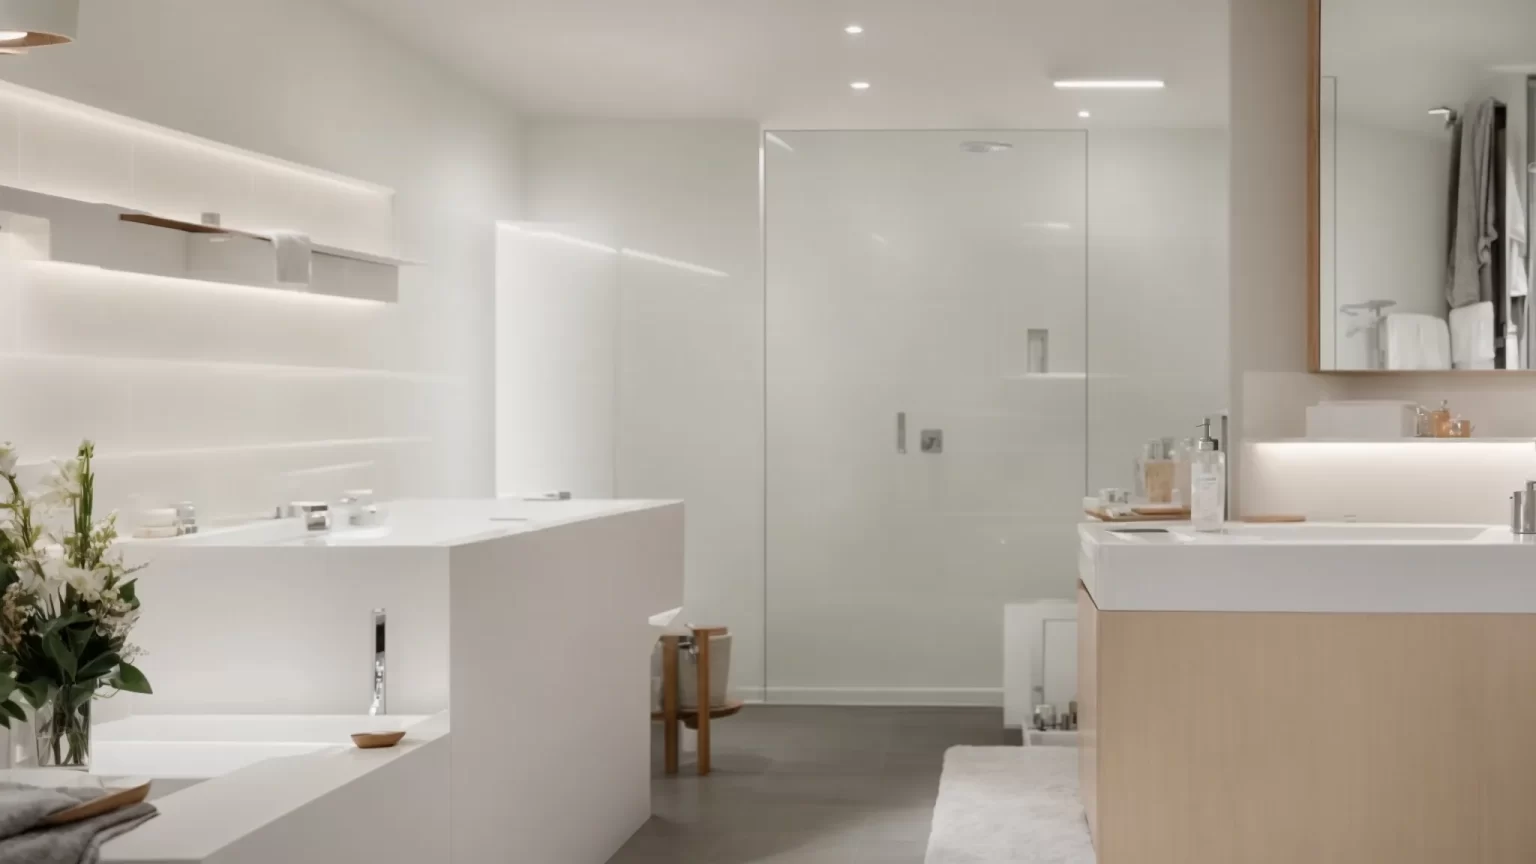 Benefits of professional bathroom renovations in Barrie